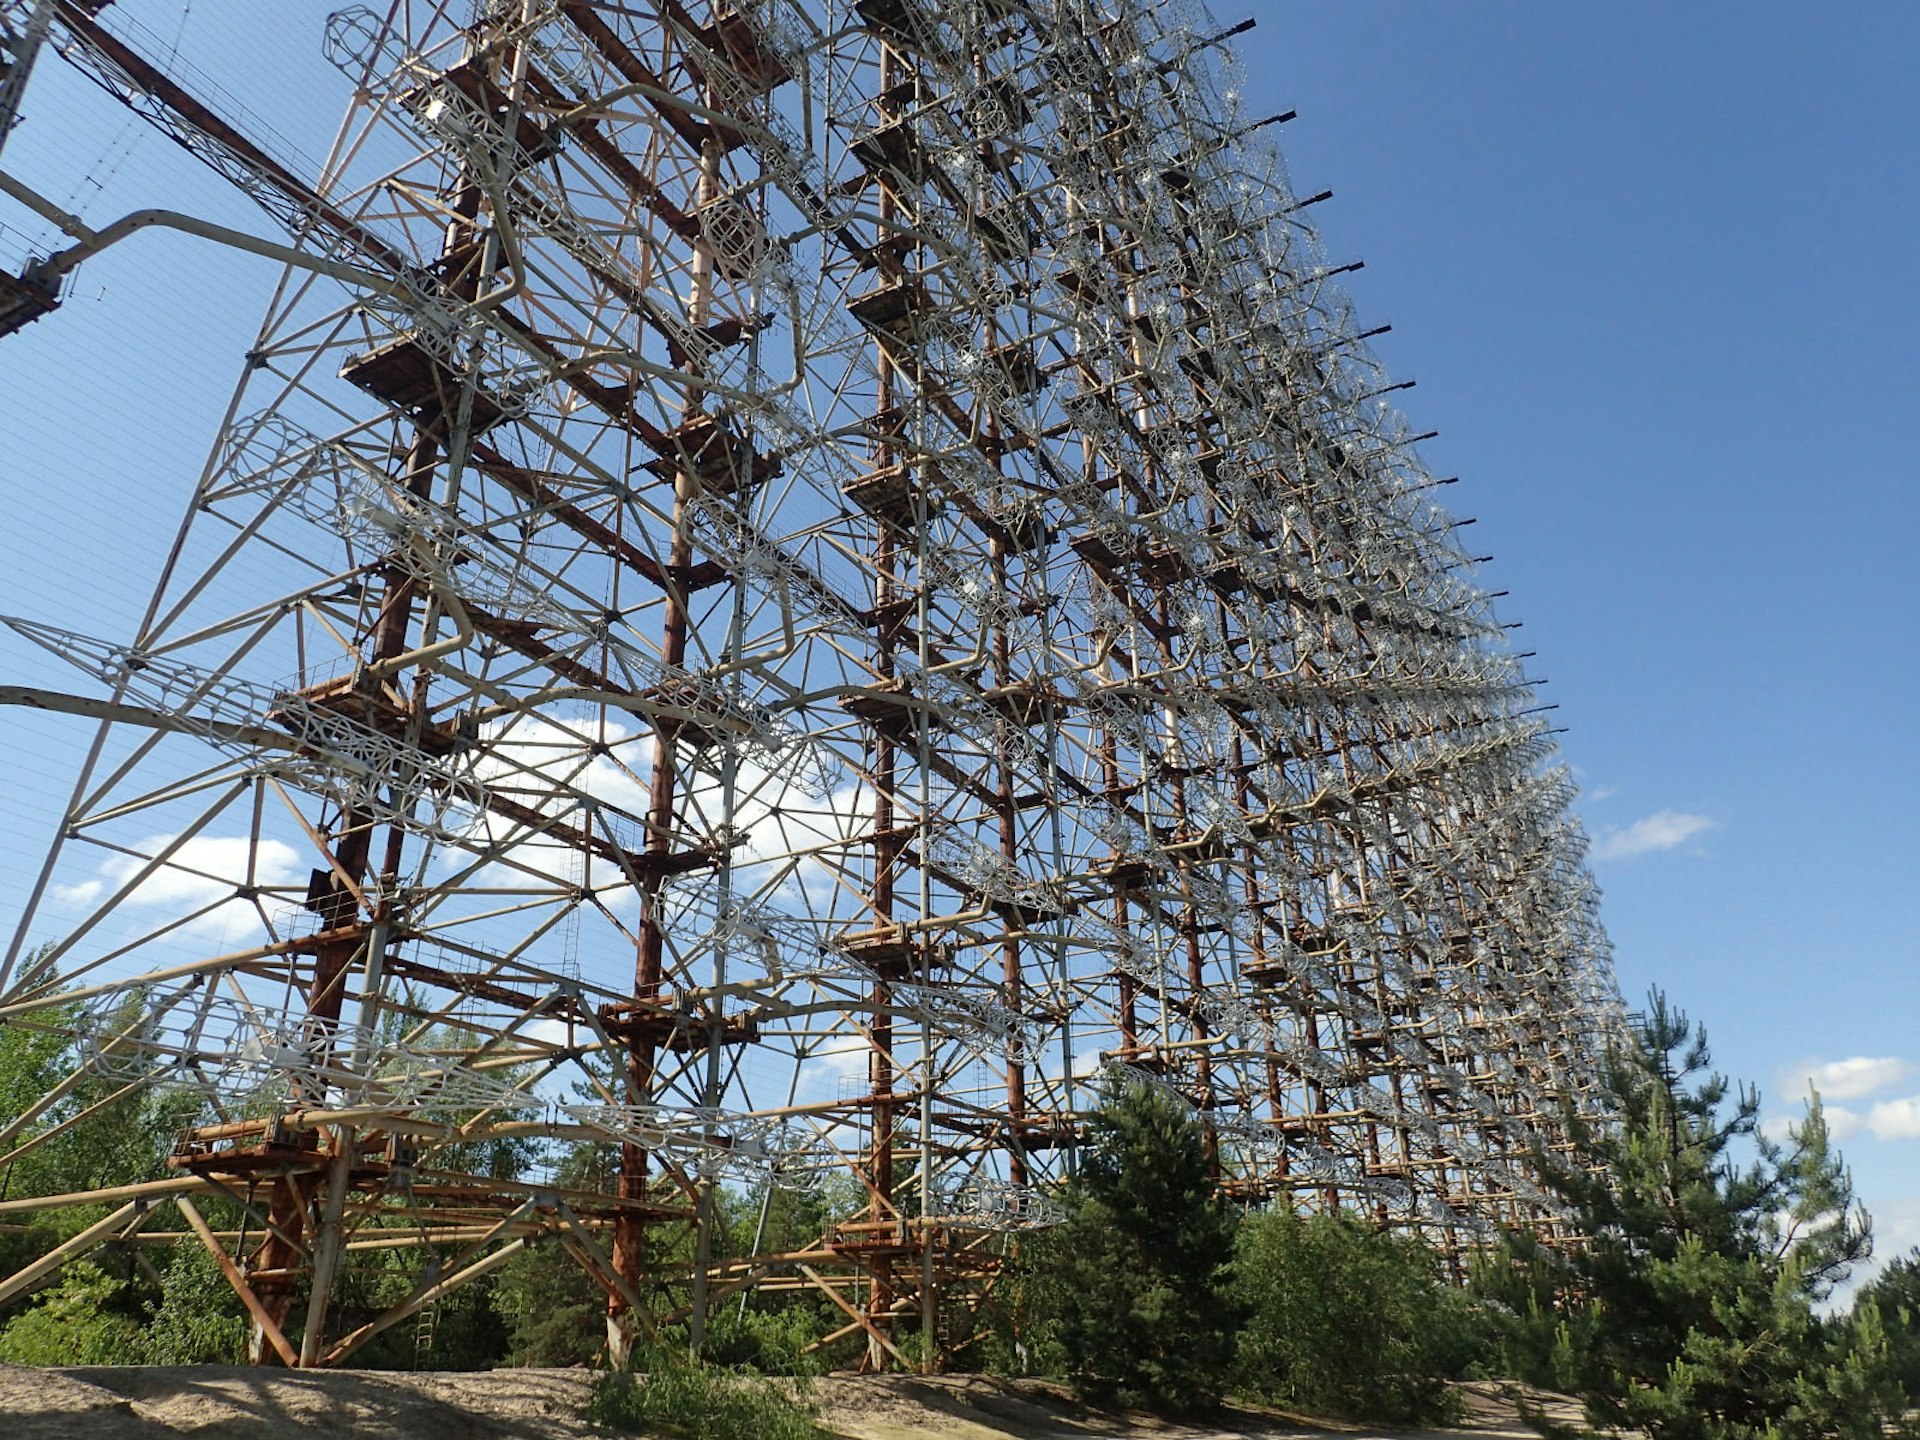 Abandoned radar installation in the Chornobyl Exclusion Zone, resembling a huge scaffolding unit made of lots of grey pipes and brown pillars.